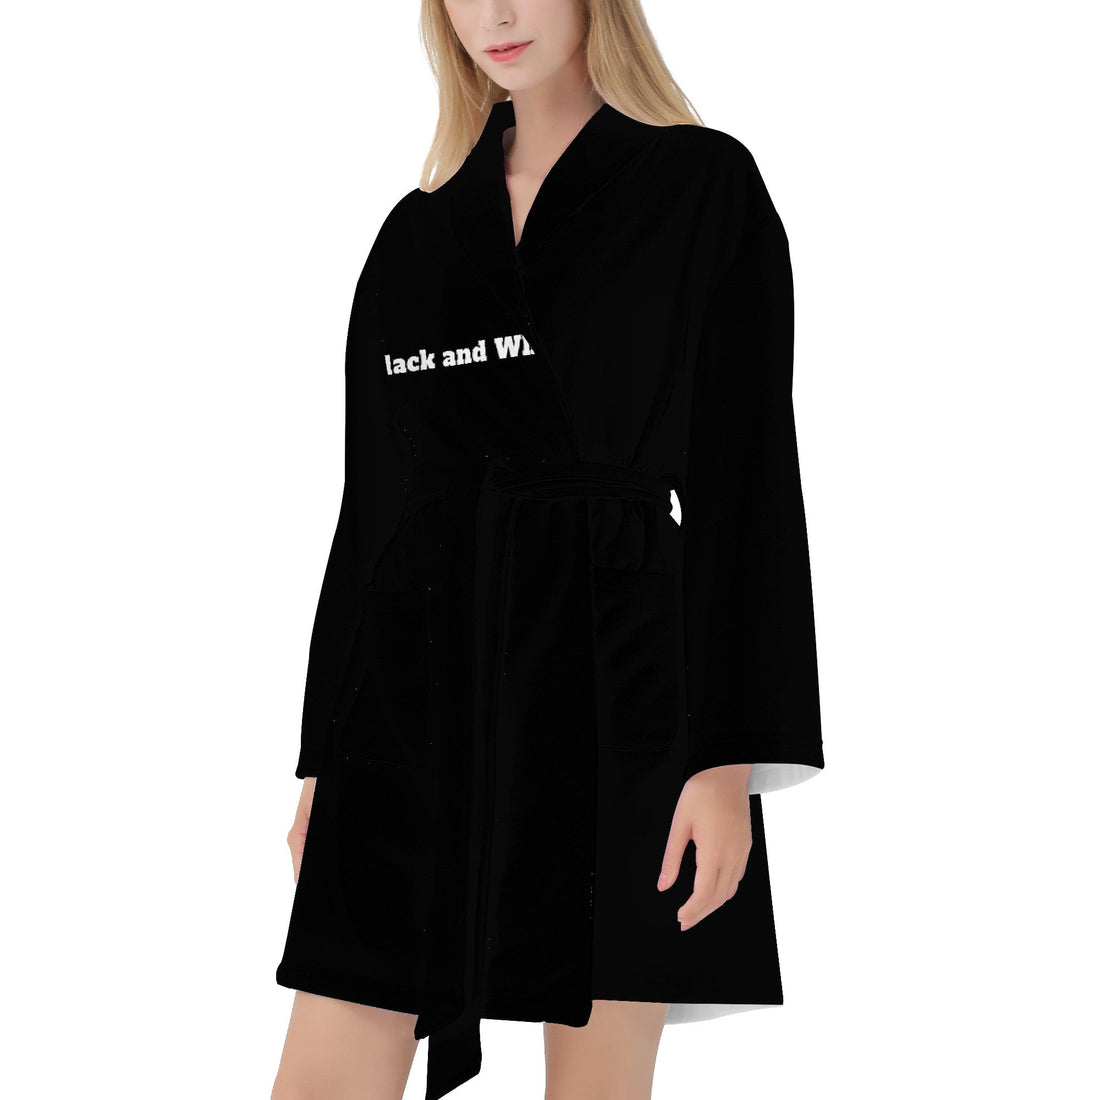 Cocoon in Style: The Black and White Charm of the Bath Robe Black Home-clothes-jewelry